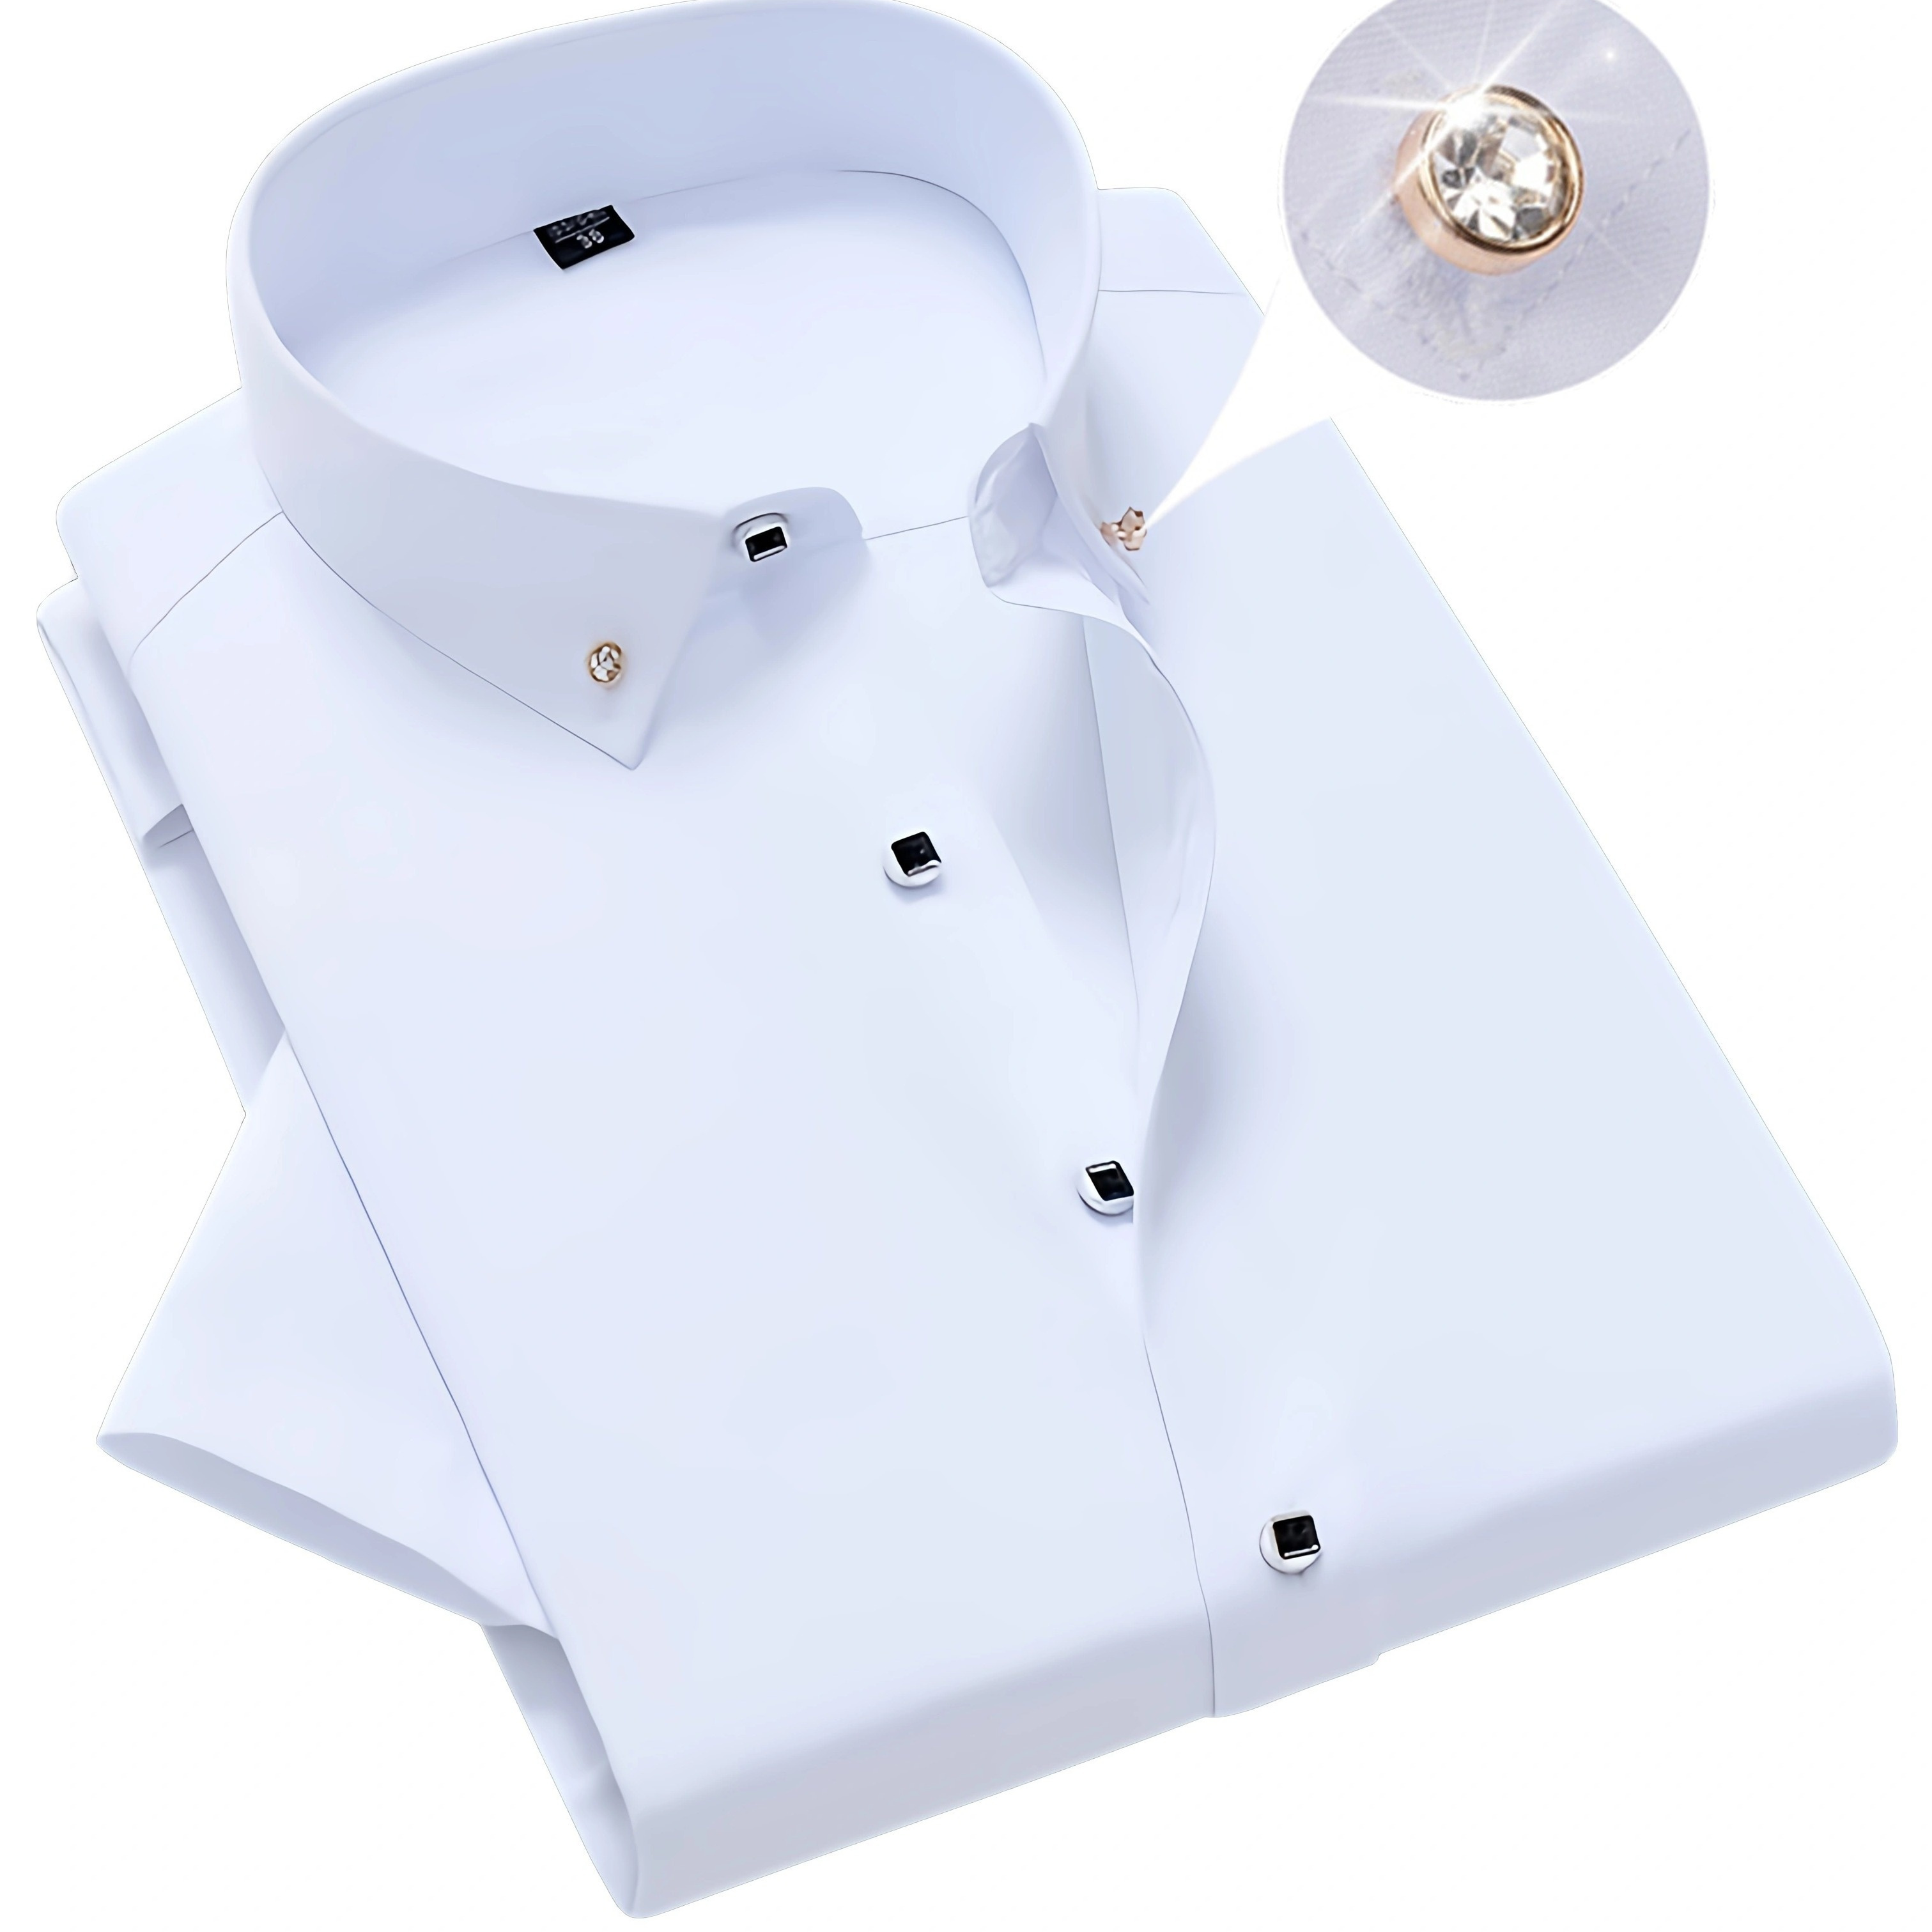 

Men's Stylish Solid Dress Shirt, Formal Breathable Lapel Button Down Short Sleeve Shirt For Business Activities